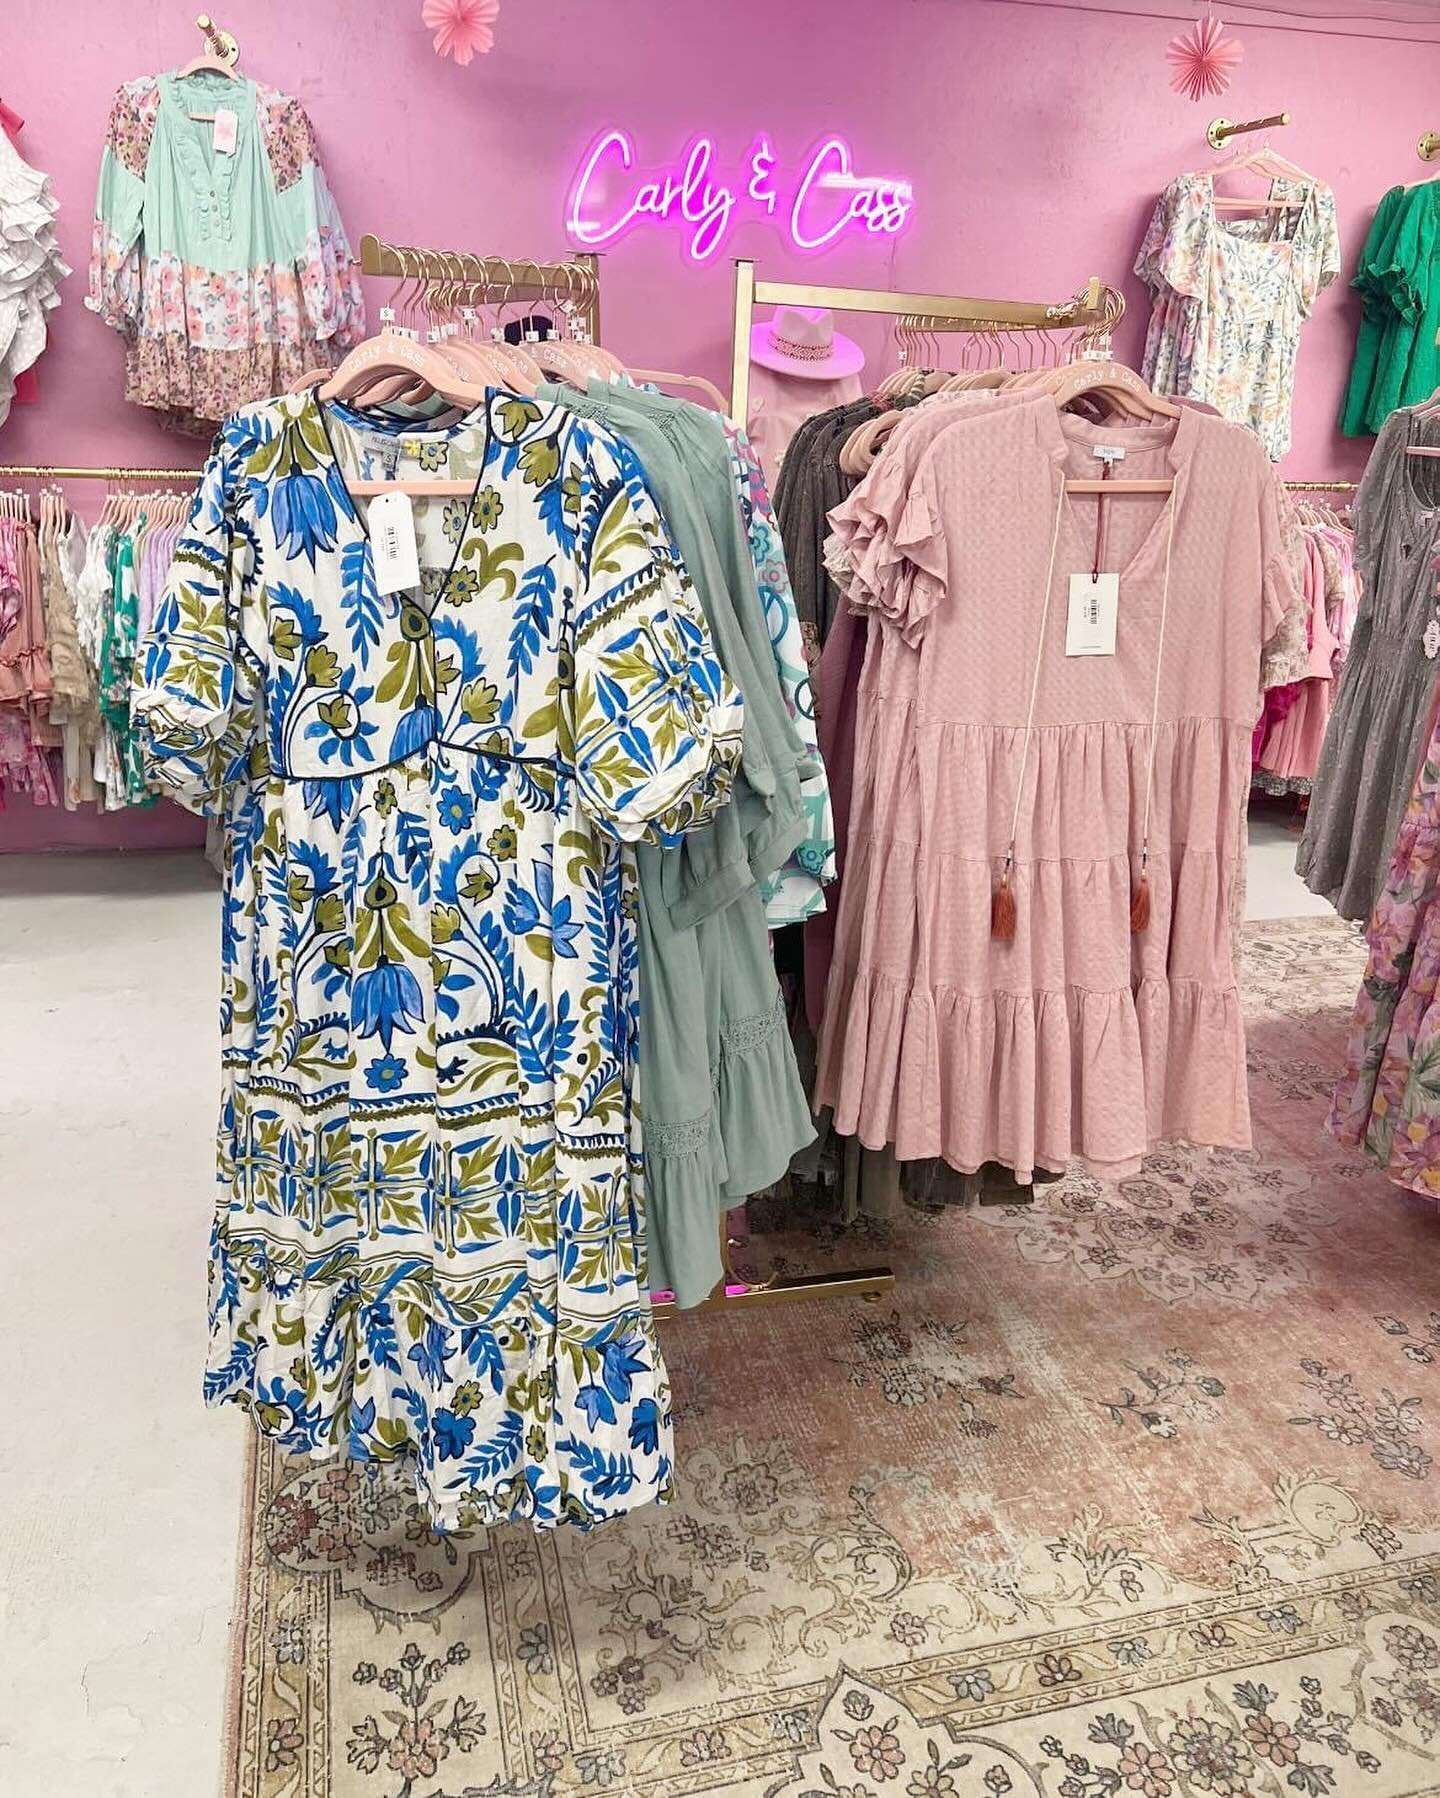 We have so many new arrivals and newly restocked clothing items in our store this week! We carry sizes Small to 3X!

Stop by and see us at 561 Mill Street in downtown Sylva! You can find us on back street-look for the pink store! 🛍️💕